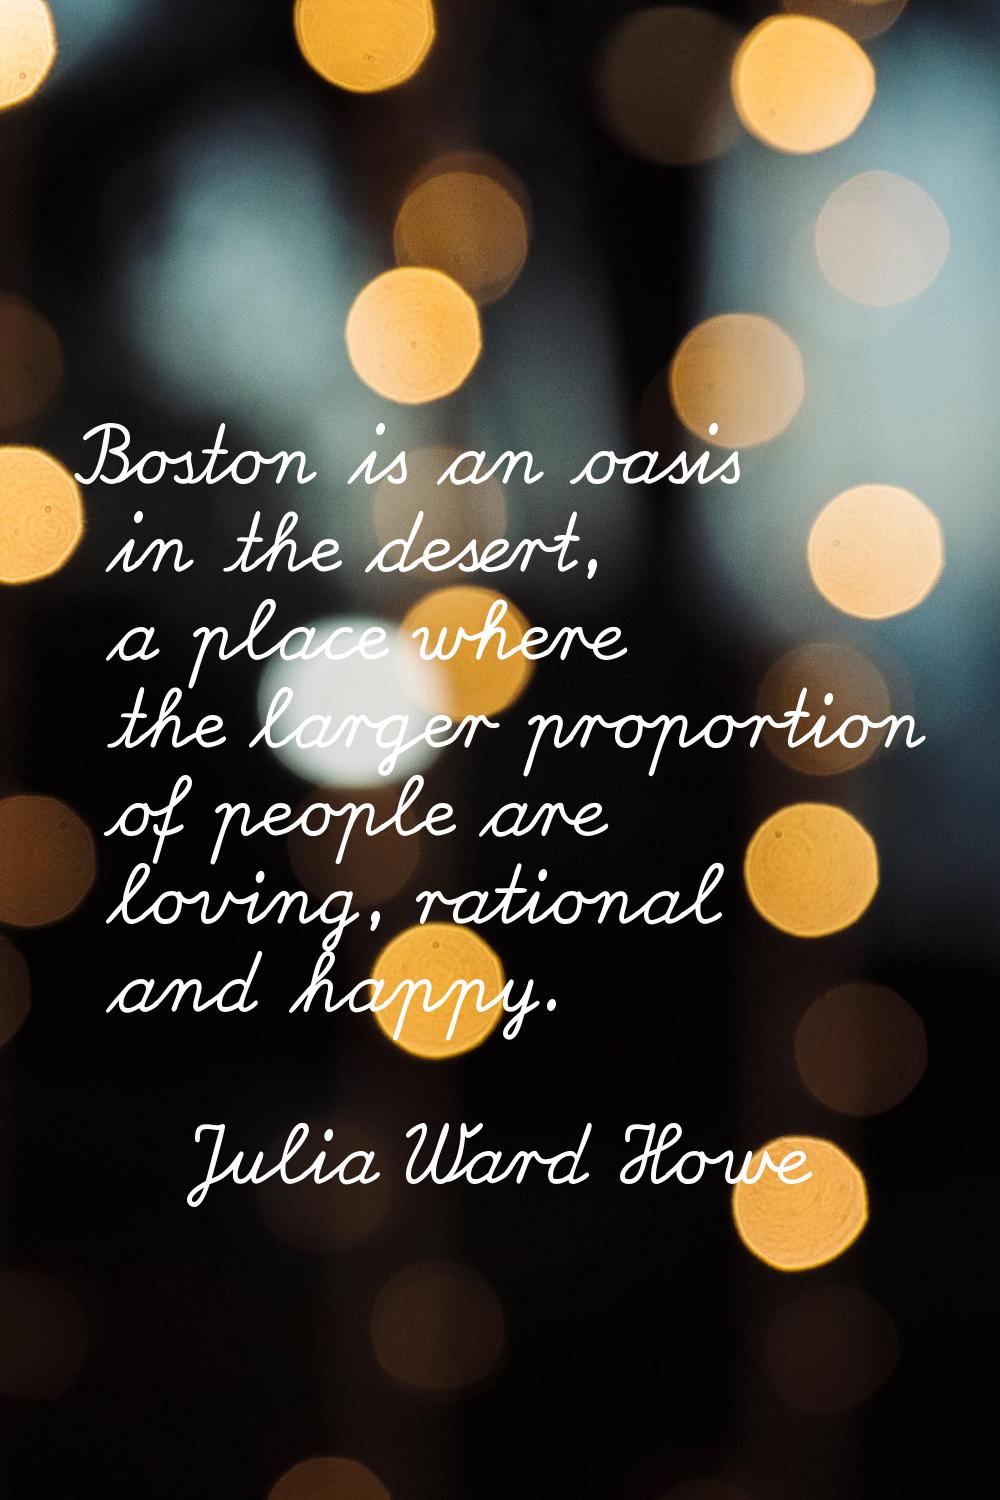 Boston is an oasis in the desert, a place where the larger proportion of people are loving, rationa